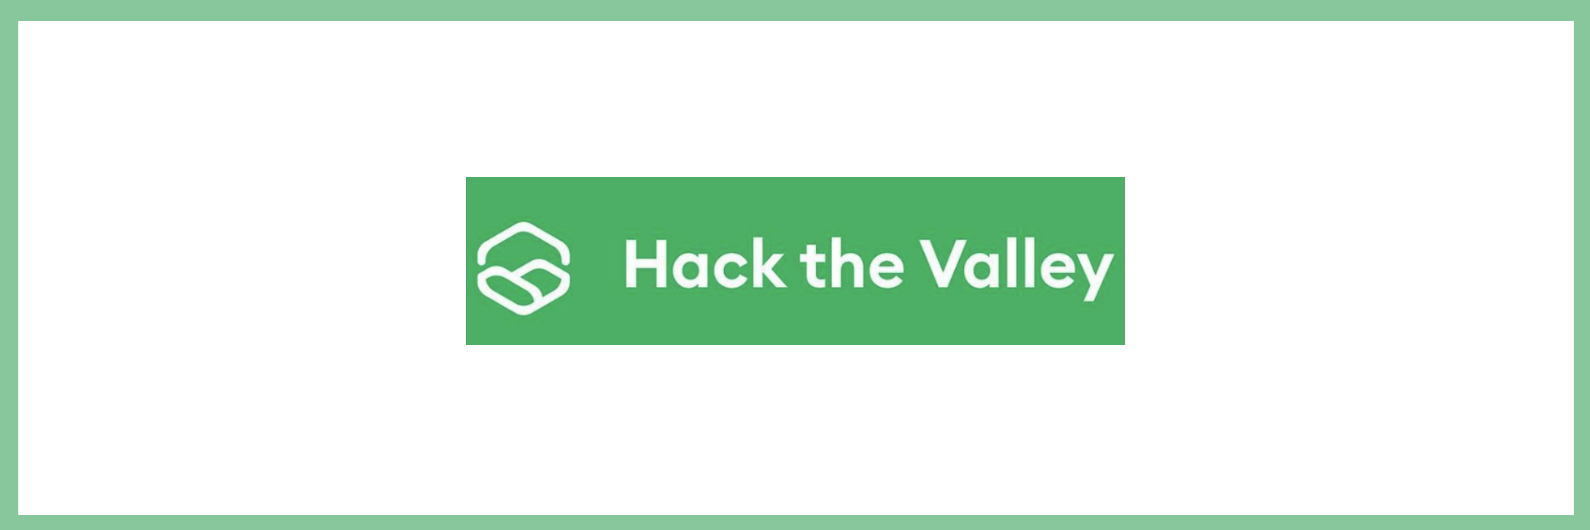 Hack the Valley